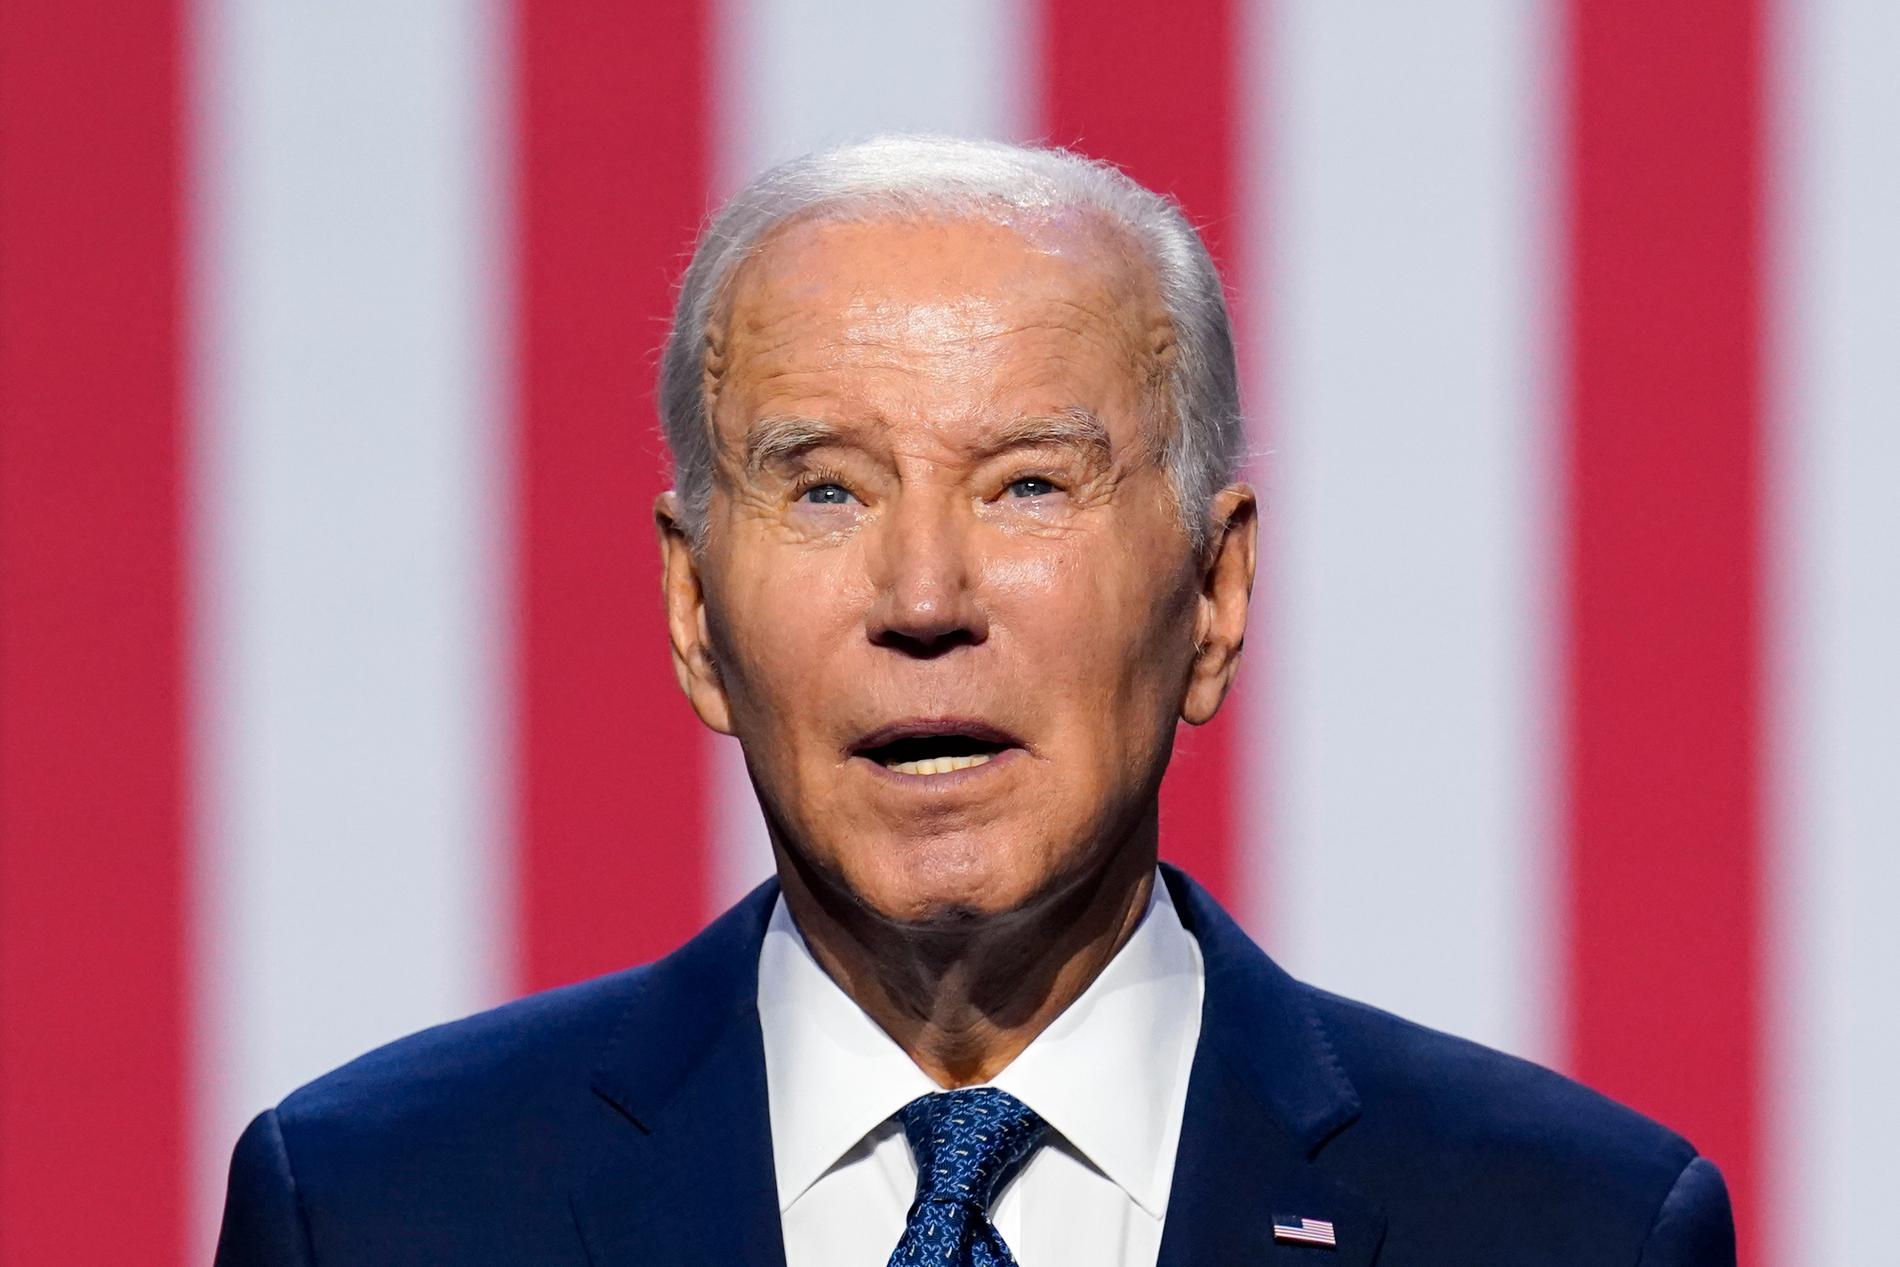 Losing cohesion: President Joe Biden is suffering from declining popularity and a fractured coalition of voters.